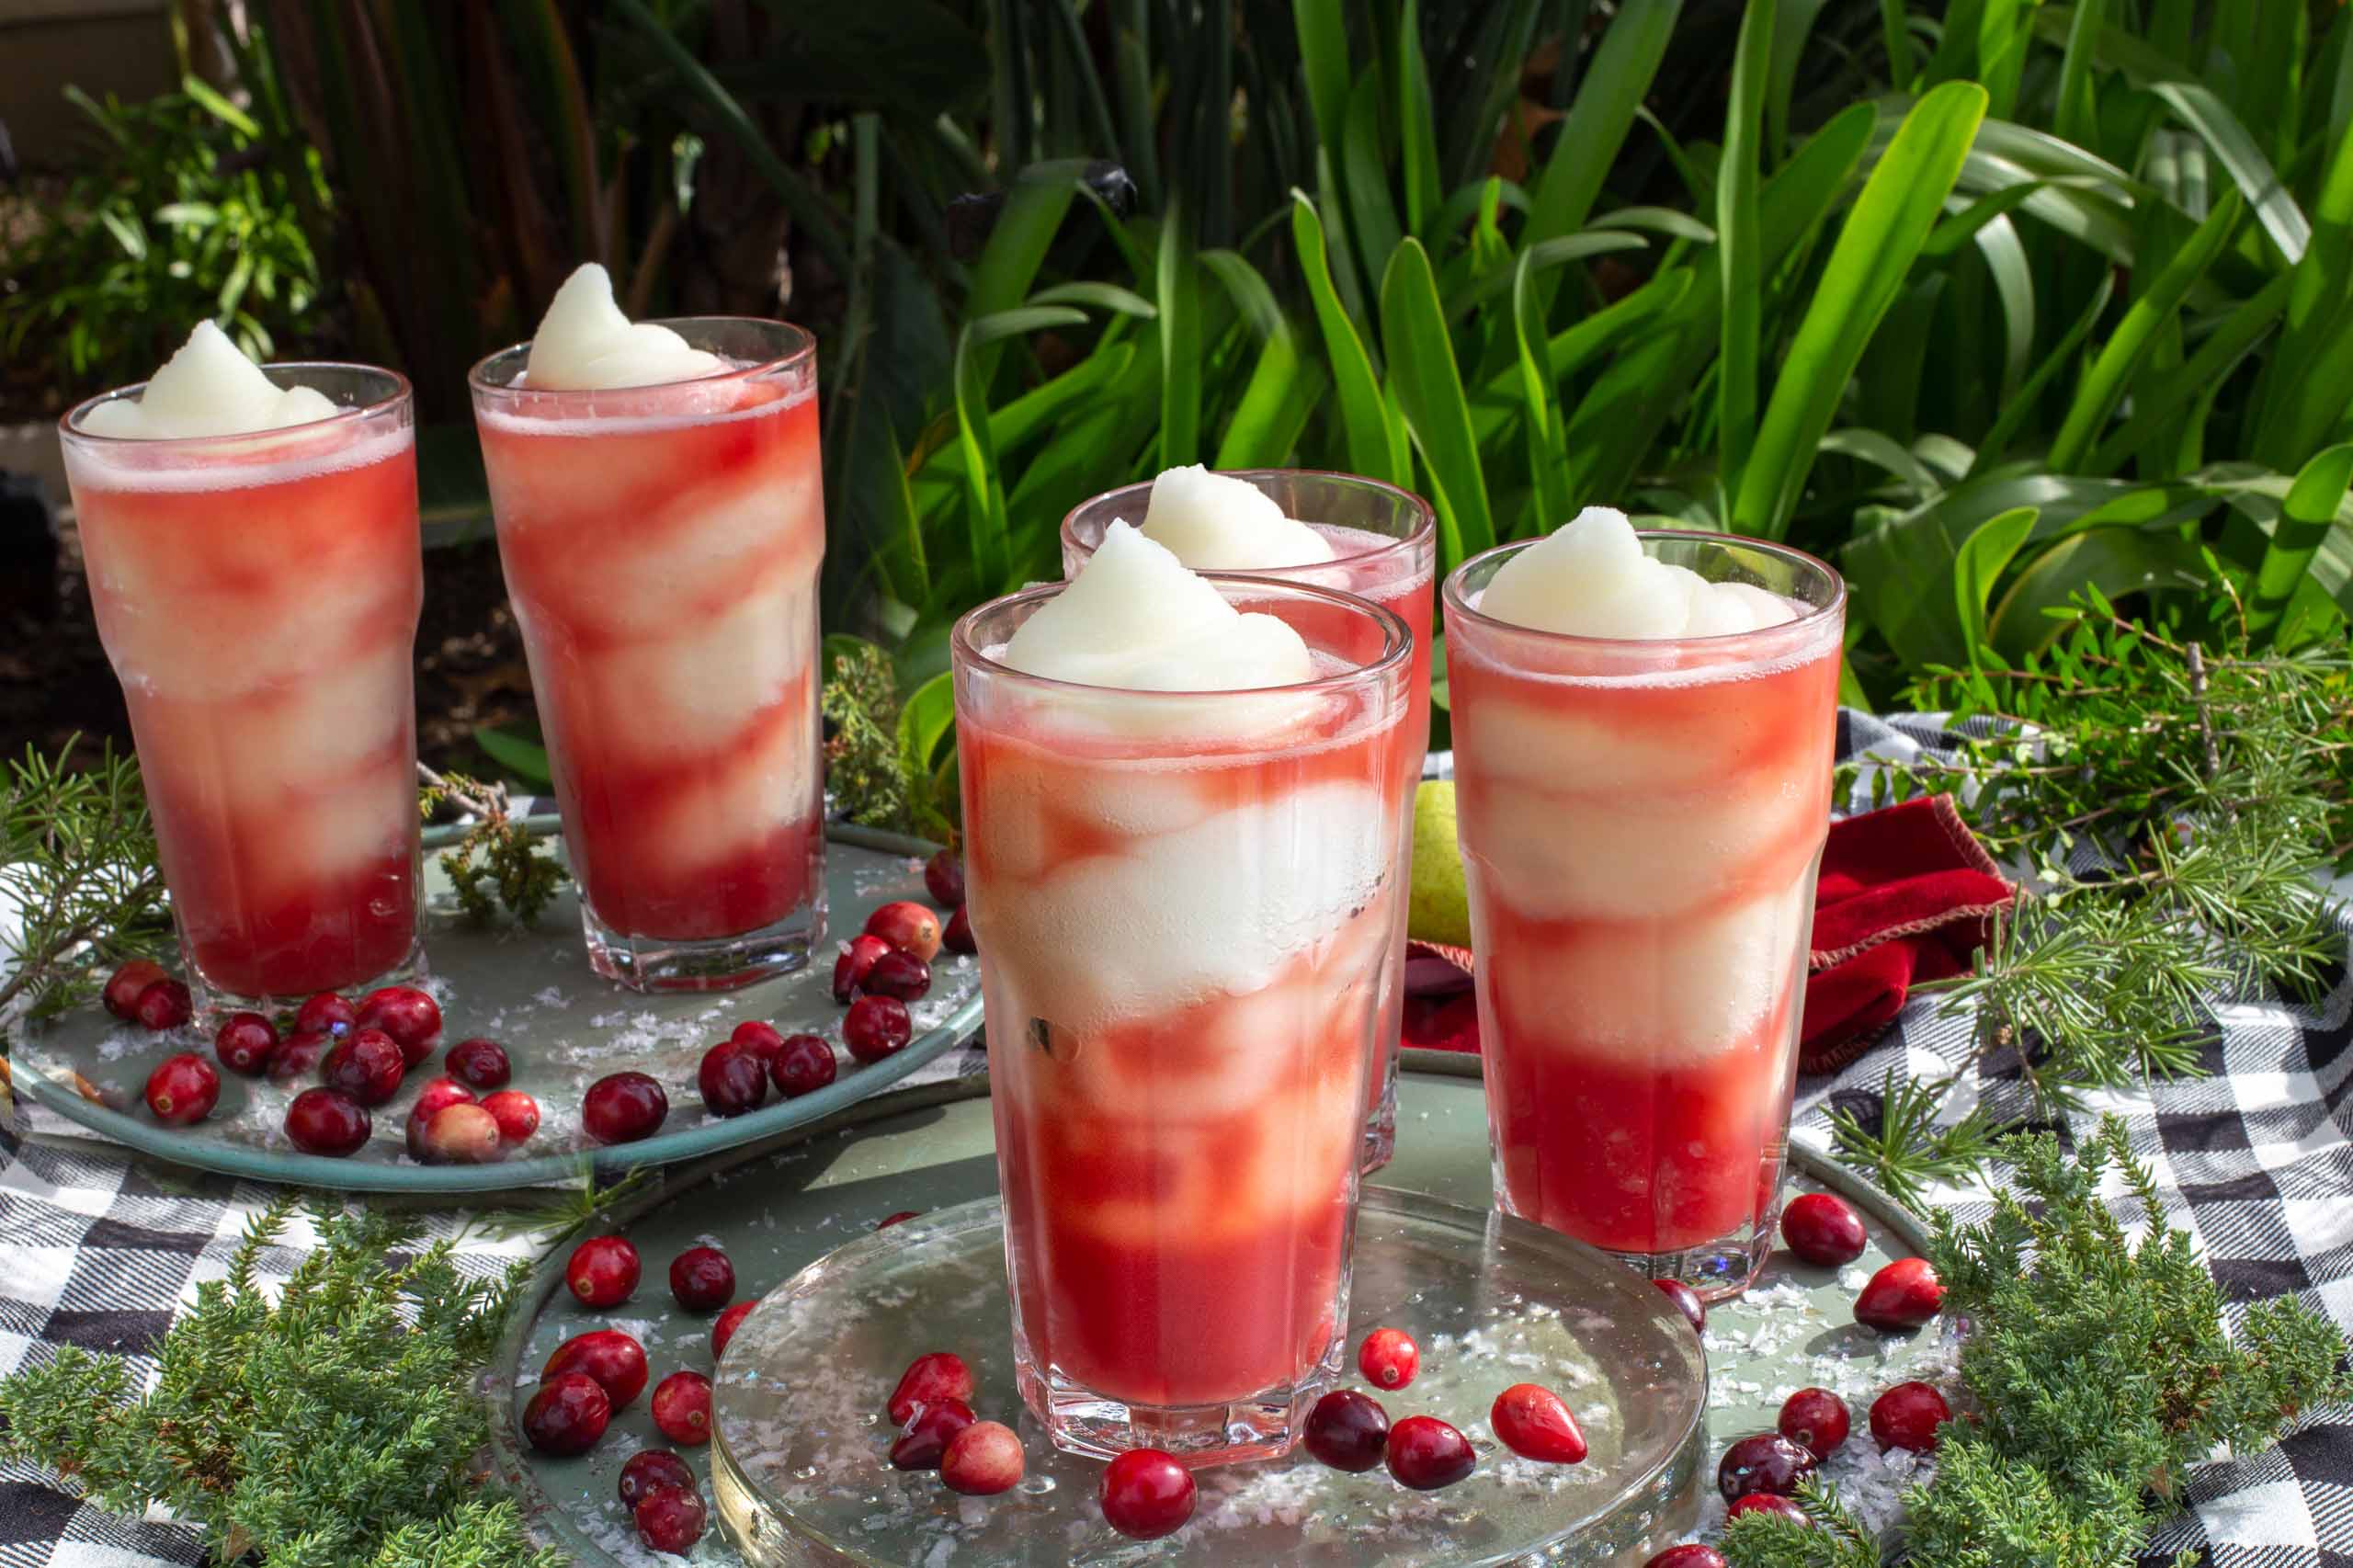 Group of our new monthly special Swirl drinks with cranberry fruit on a table setting